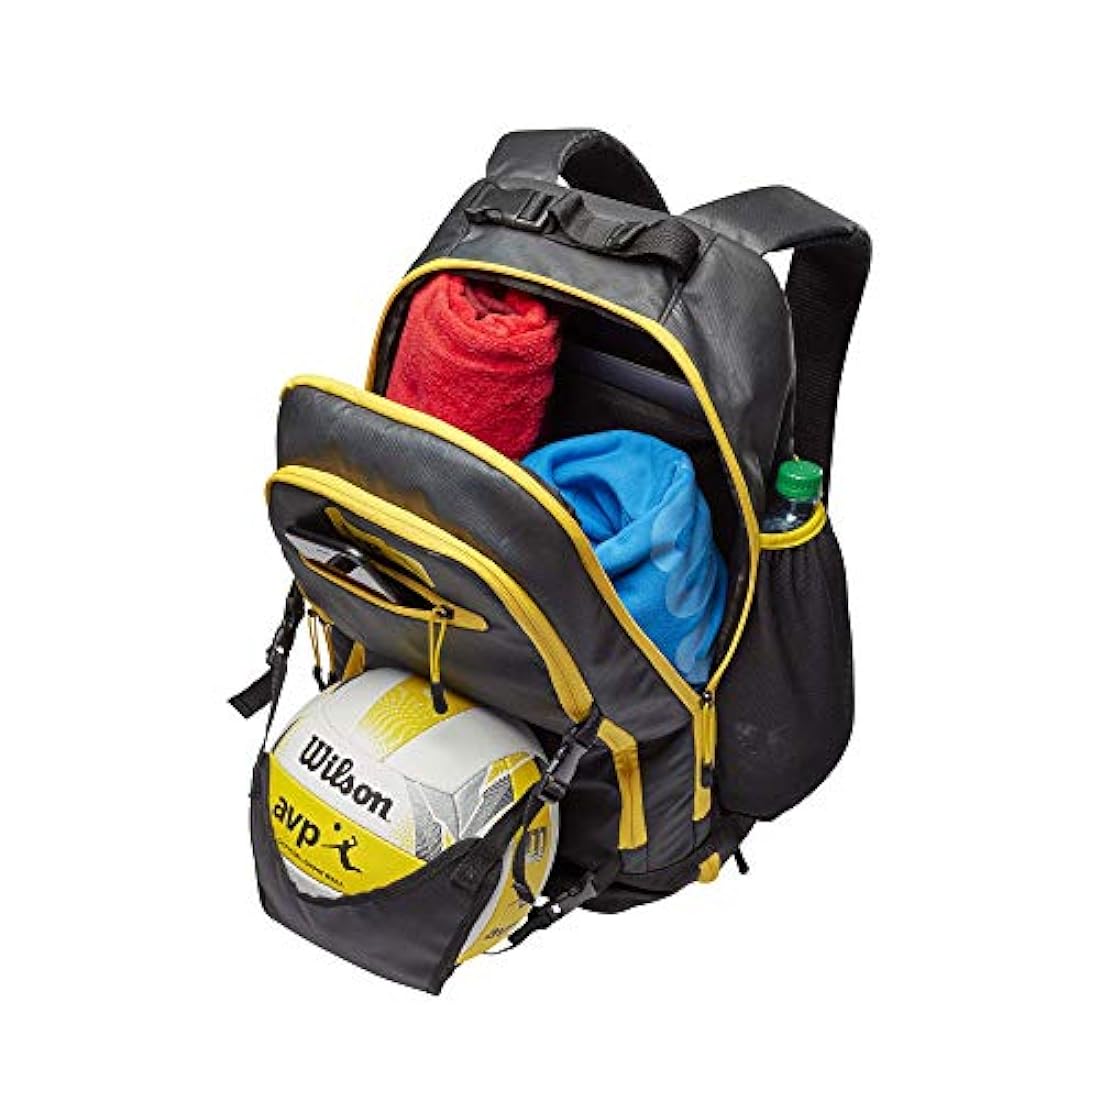 Ball Carrying Backpack’s